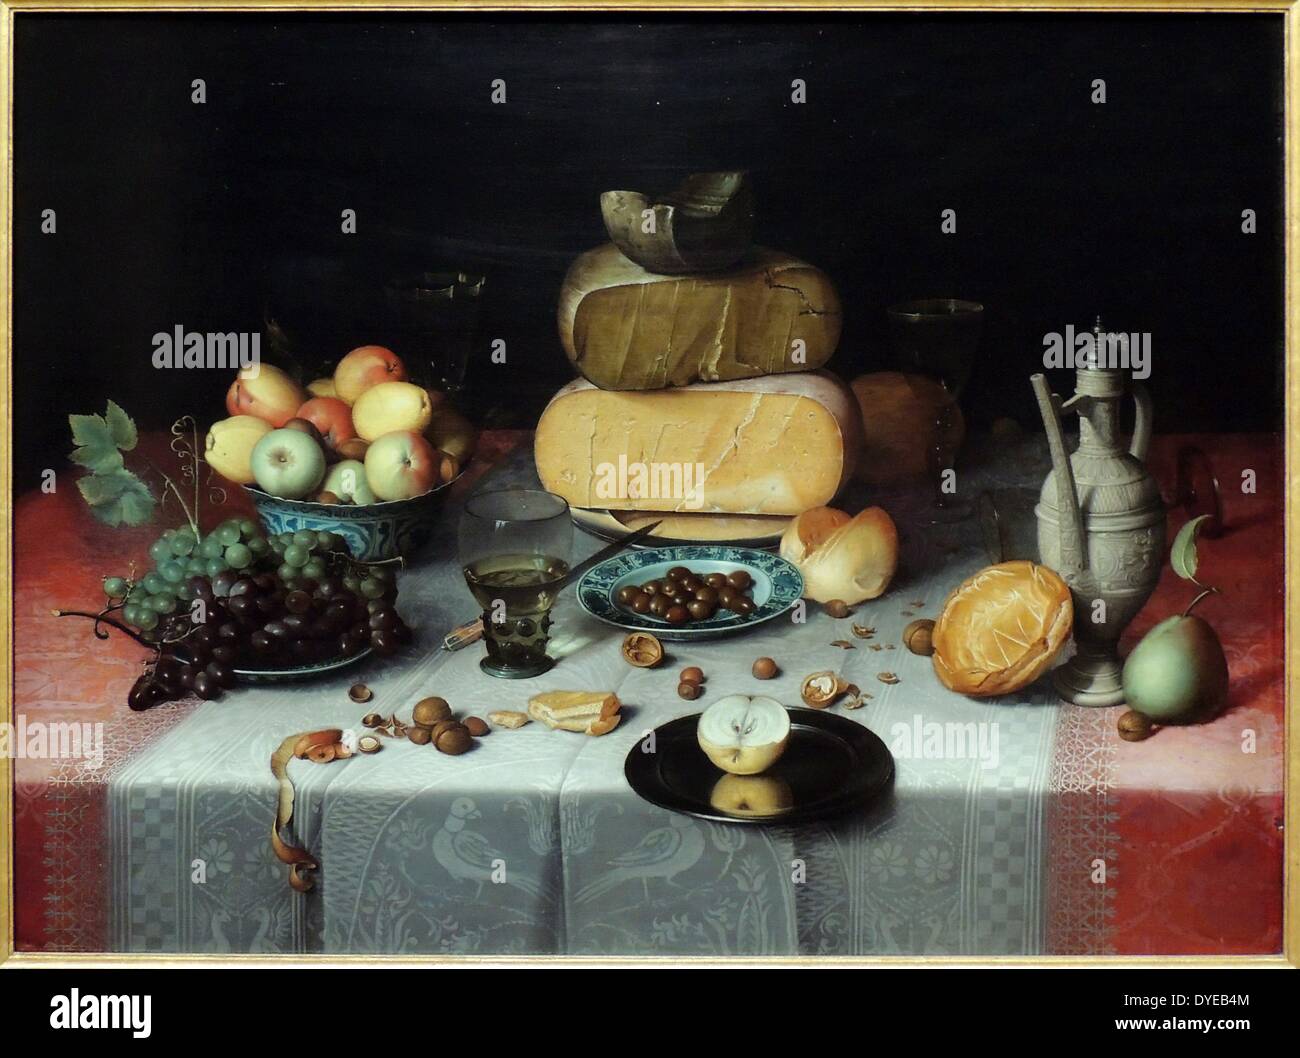 Still Life with Cheese by Floris Claesz van Dijck (1575-1651) oil on panel, c 1615. Fruit, bread and cheese - grouped by type - are set on a table covered with damask tablecloths. The illusion of reality is astounding, the pewter plate extending over the edge of the table seems close enough to touch. The Haarlem painter Floris van Dijck ranked among the pioneers of Dutch still-life painting. Stock Photo